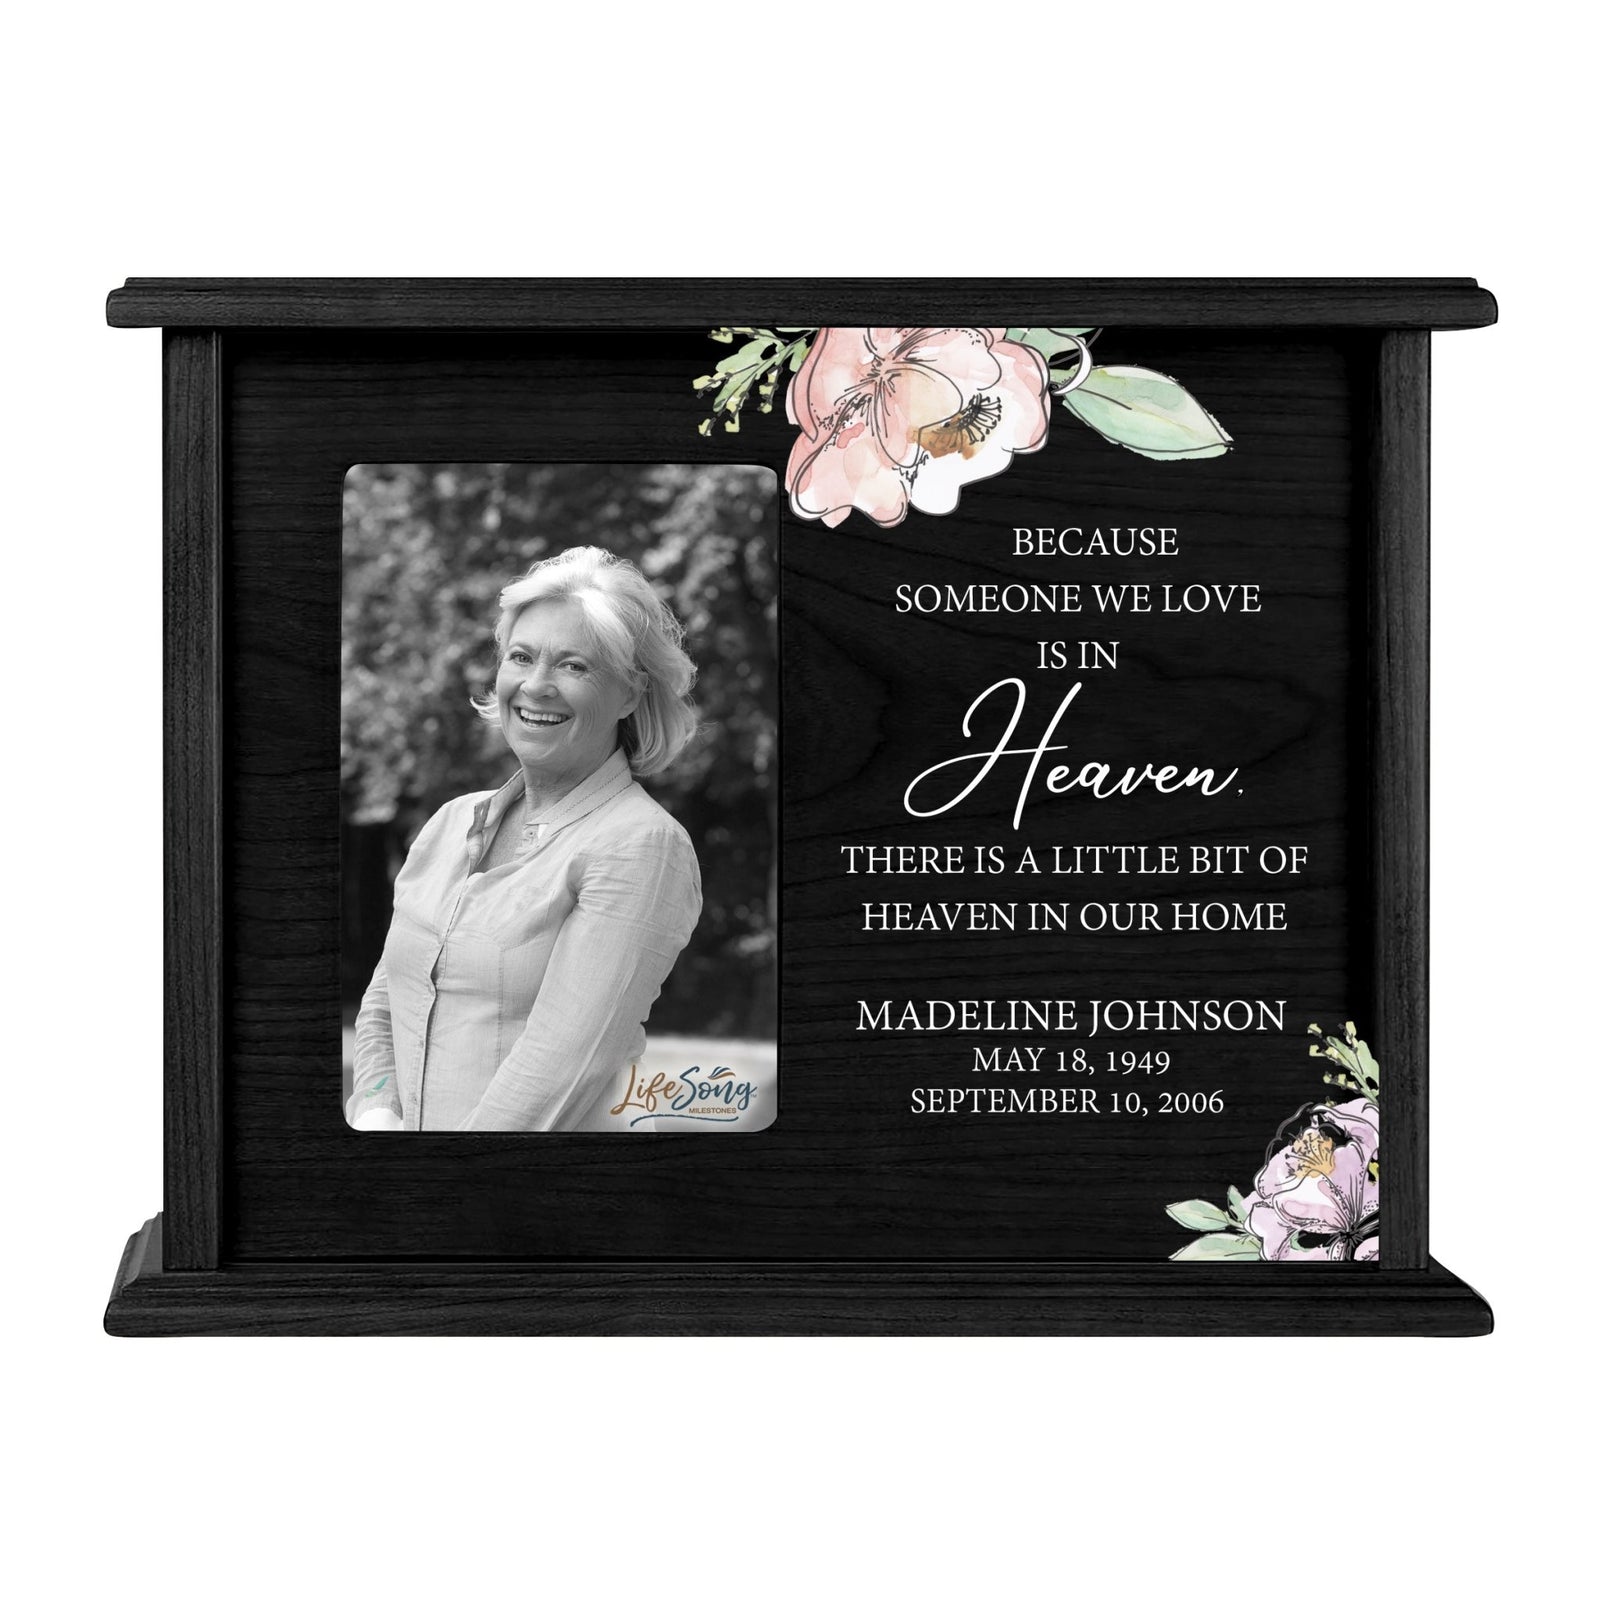 Personalized Memorial Cherry Wood 12 x 4.5 x 9 Cremation Urn Box with Picture Frame holds 200 cu in of Human Ashes and 4x6 Photo - Because Someone We Love (Black) - LifeSong Milestones